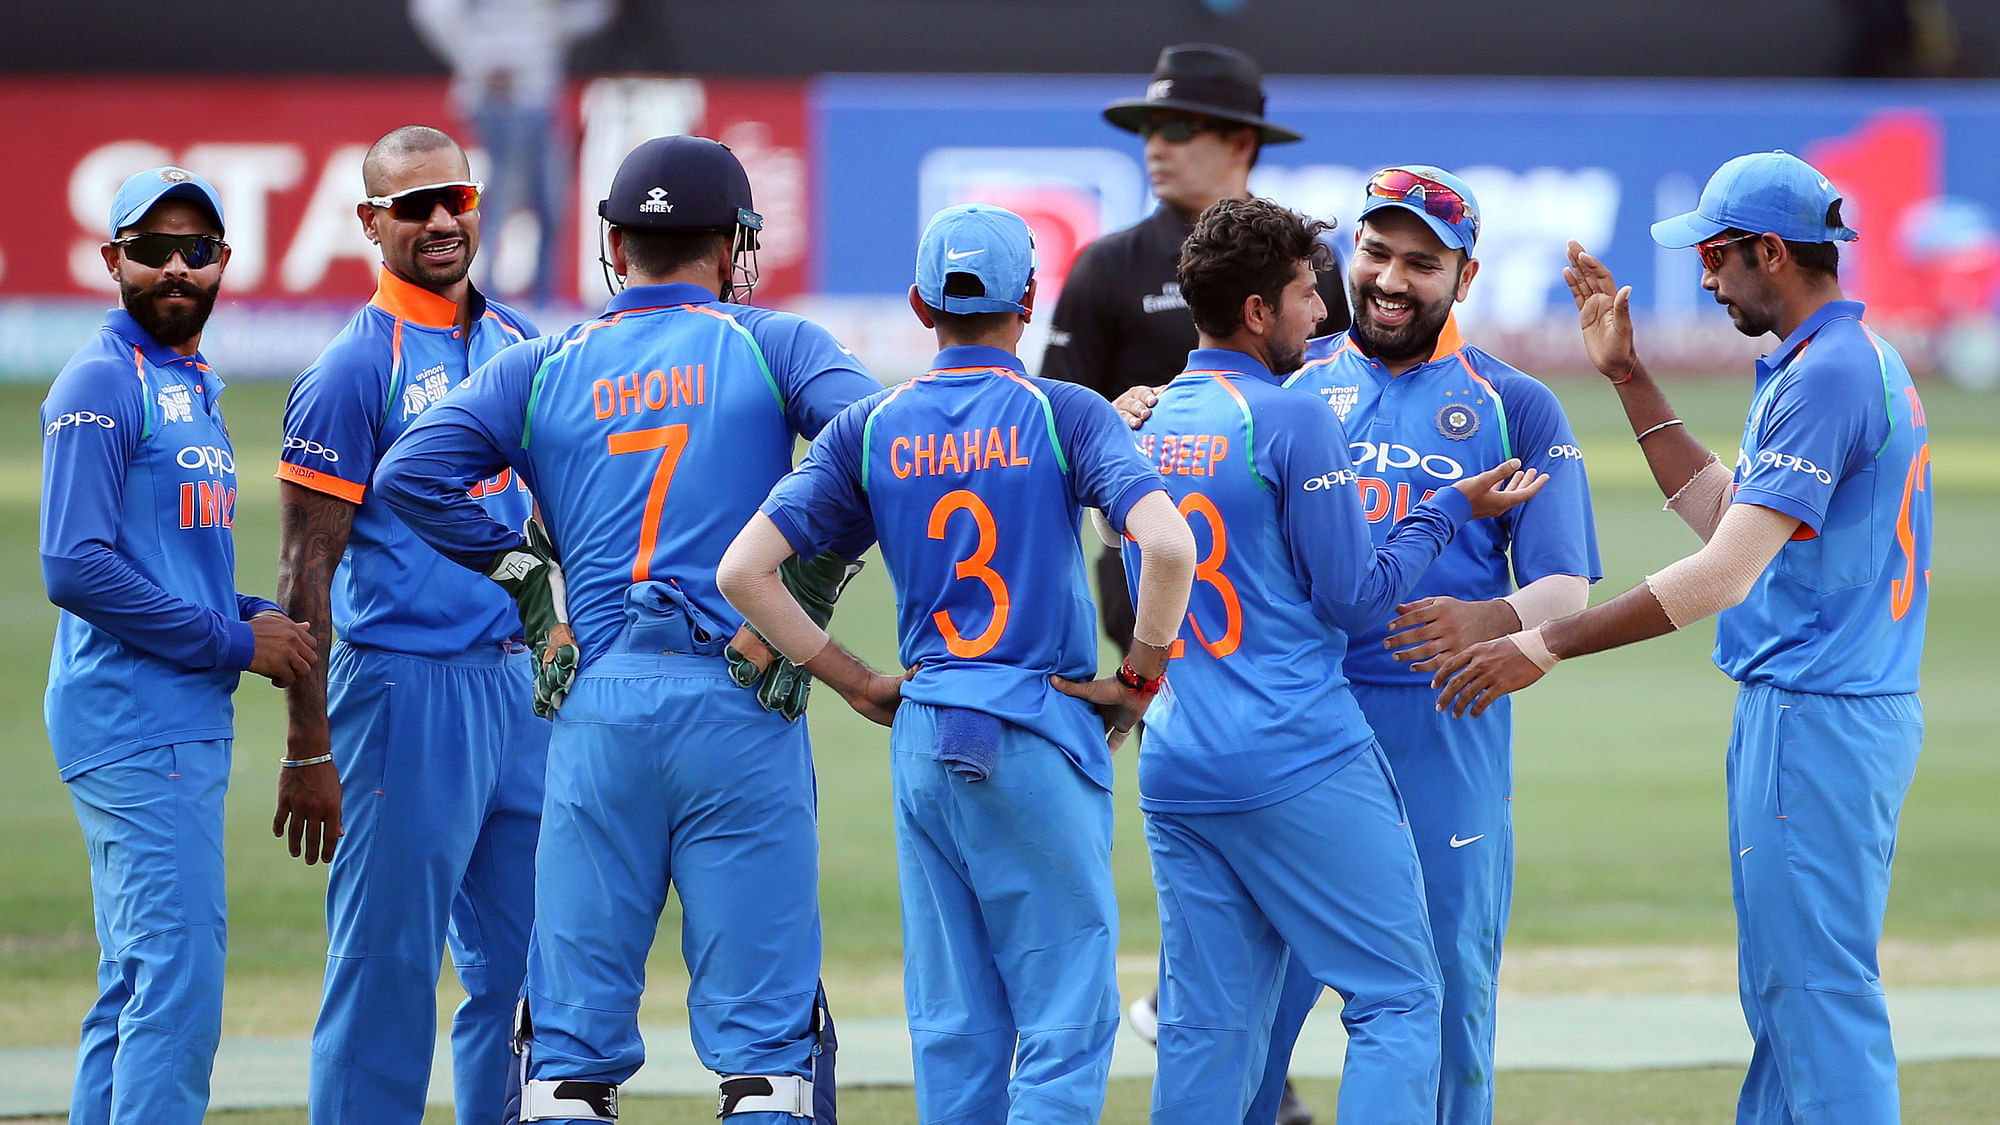 India beat Pakistan by 9 wickets for their biggest-ever victory over their rivals in one-day cricket.